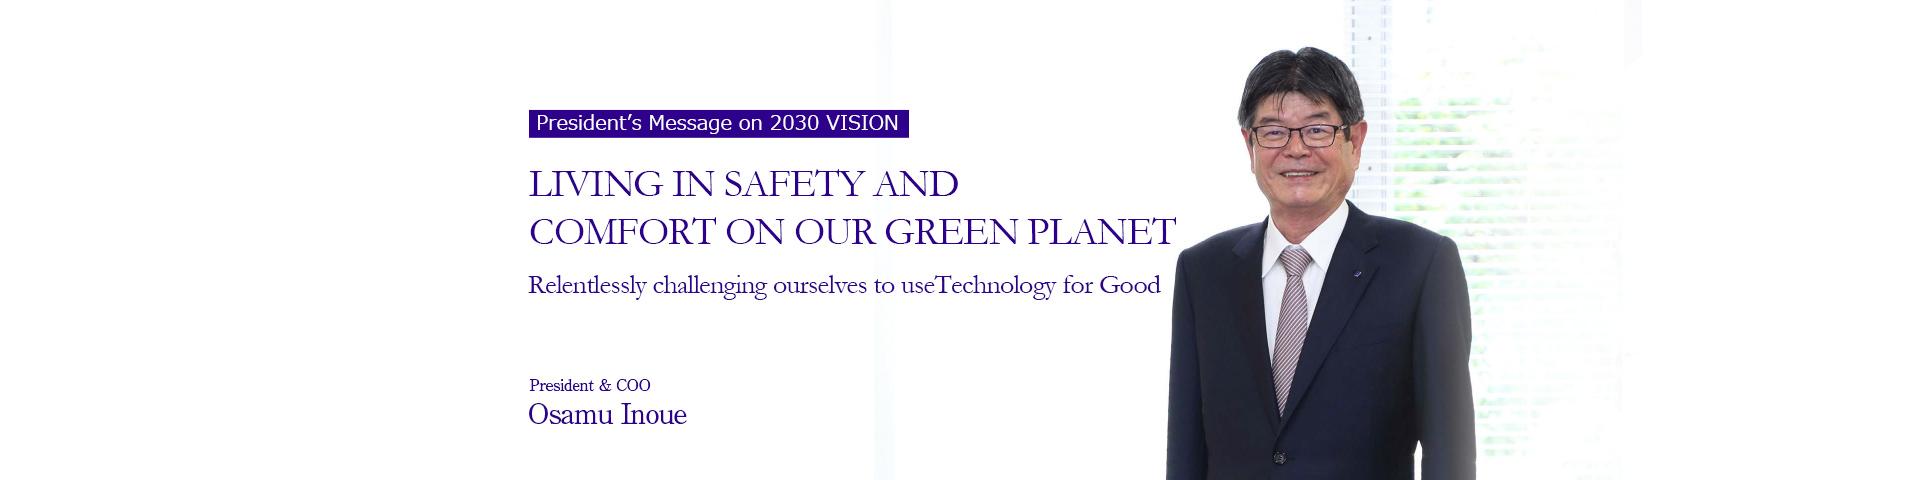 President’s Message on 2030 VISION